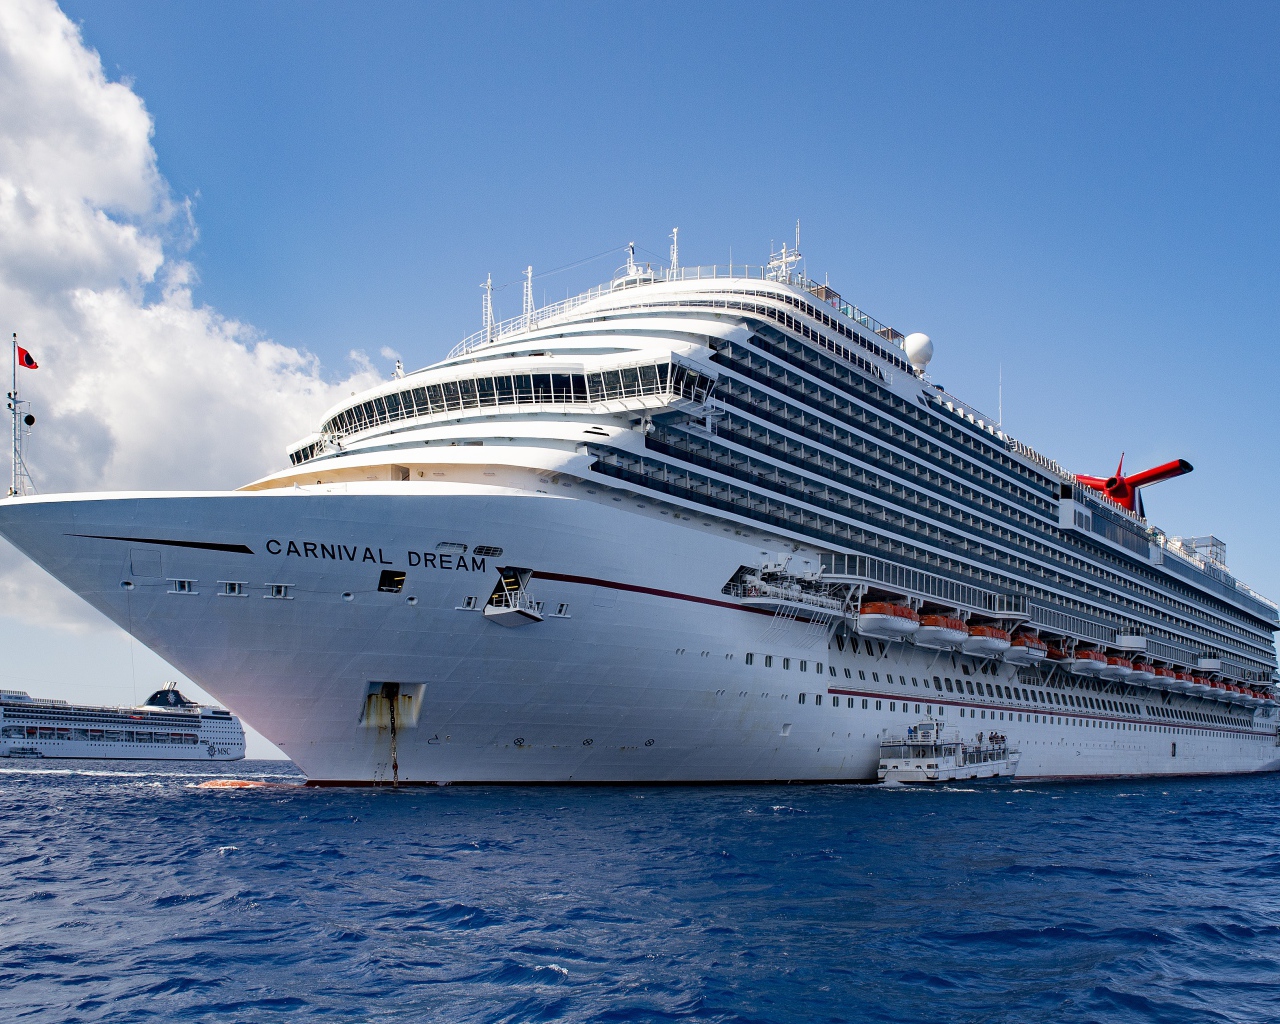 Large Carnival Dream cruise liner in the sea